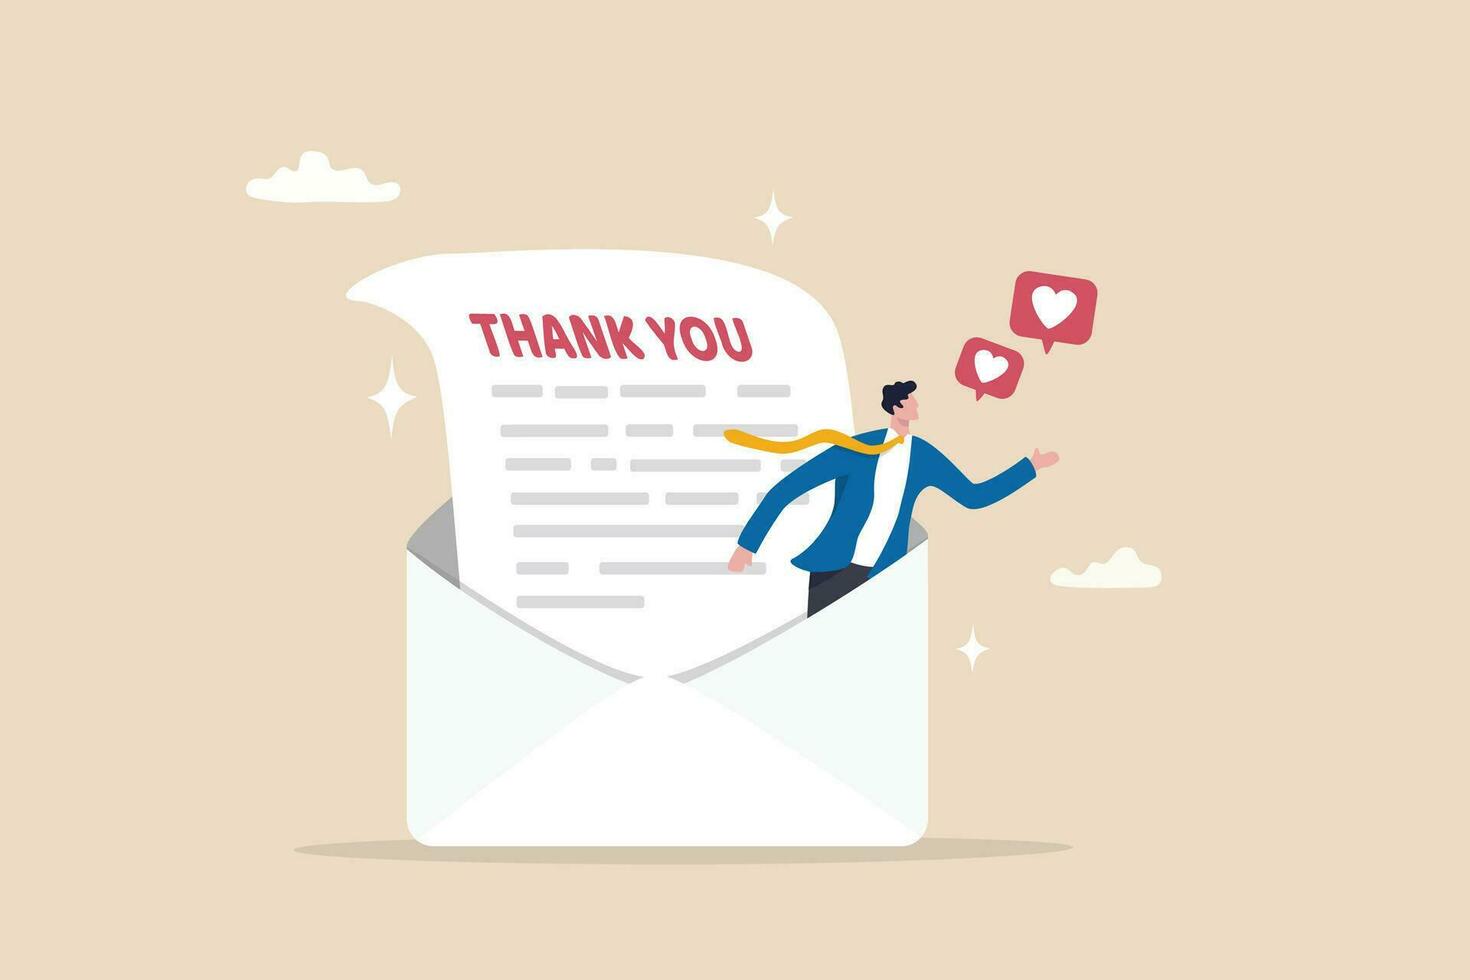 Thank you message, appreciation or greeting to client, customer or employee communication, gratitude letter email, calligraphy concept, businessman saying thank you on thanks message envelope. vector